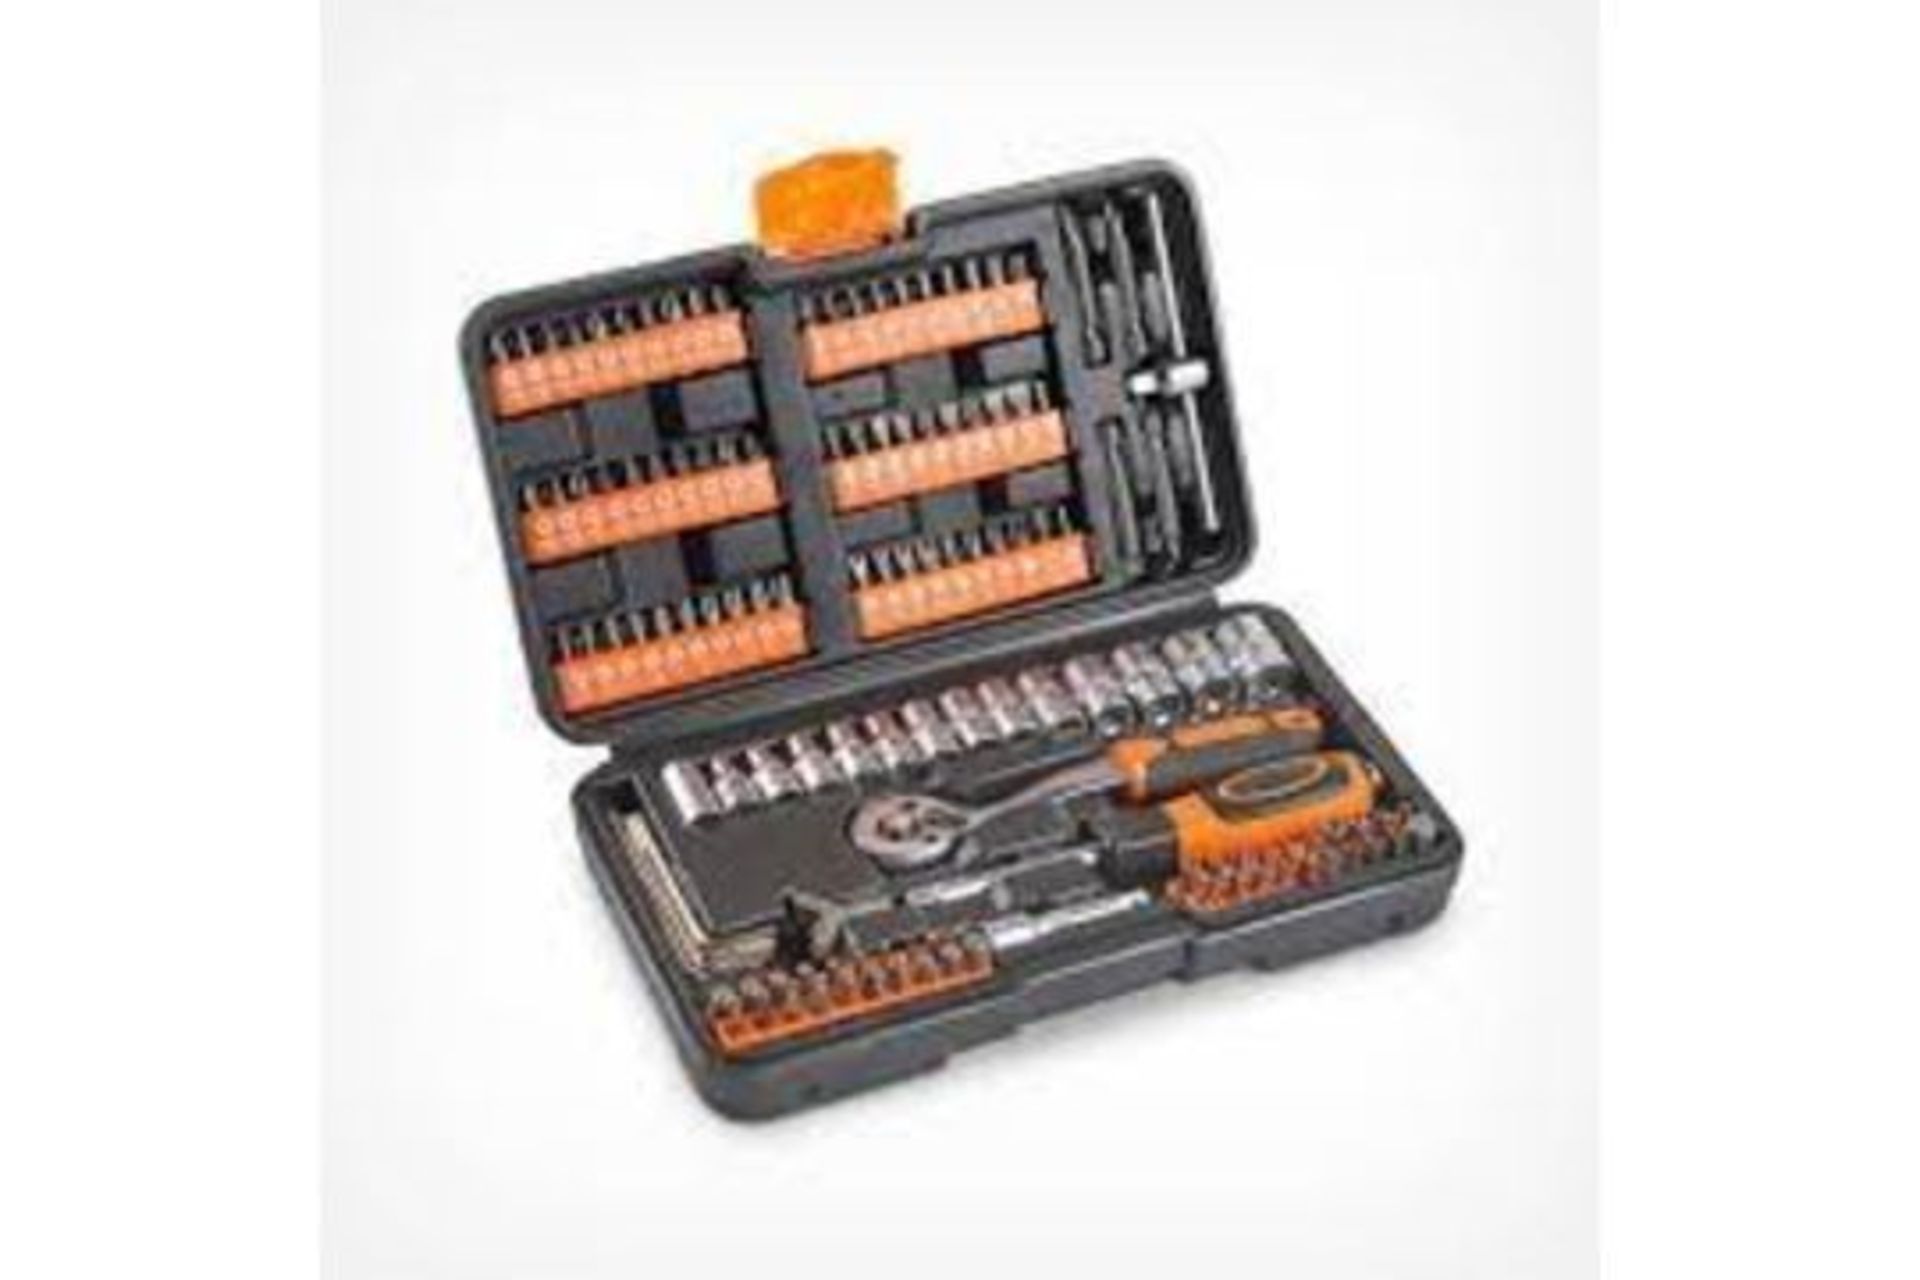 New Boxed 130pc Socket + Bit Sets. (REF176-OFC) Be prepared for the unexpected with the 130pc Socket